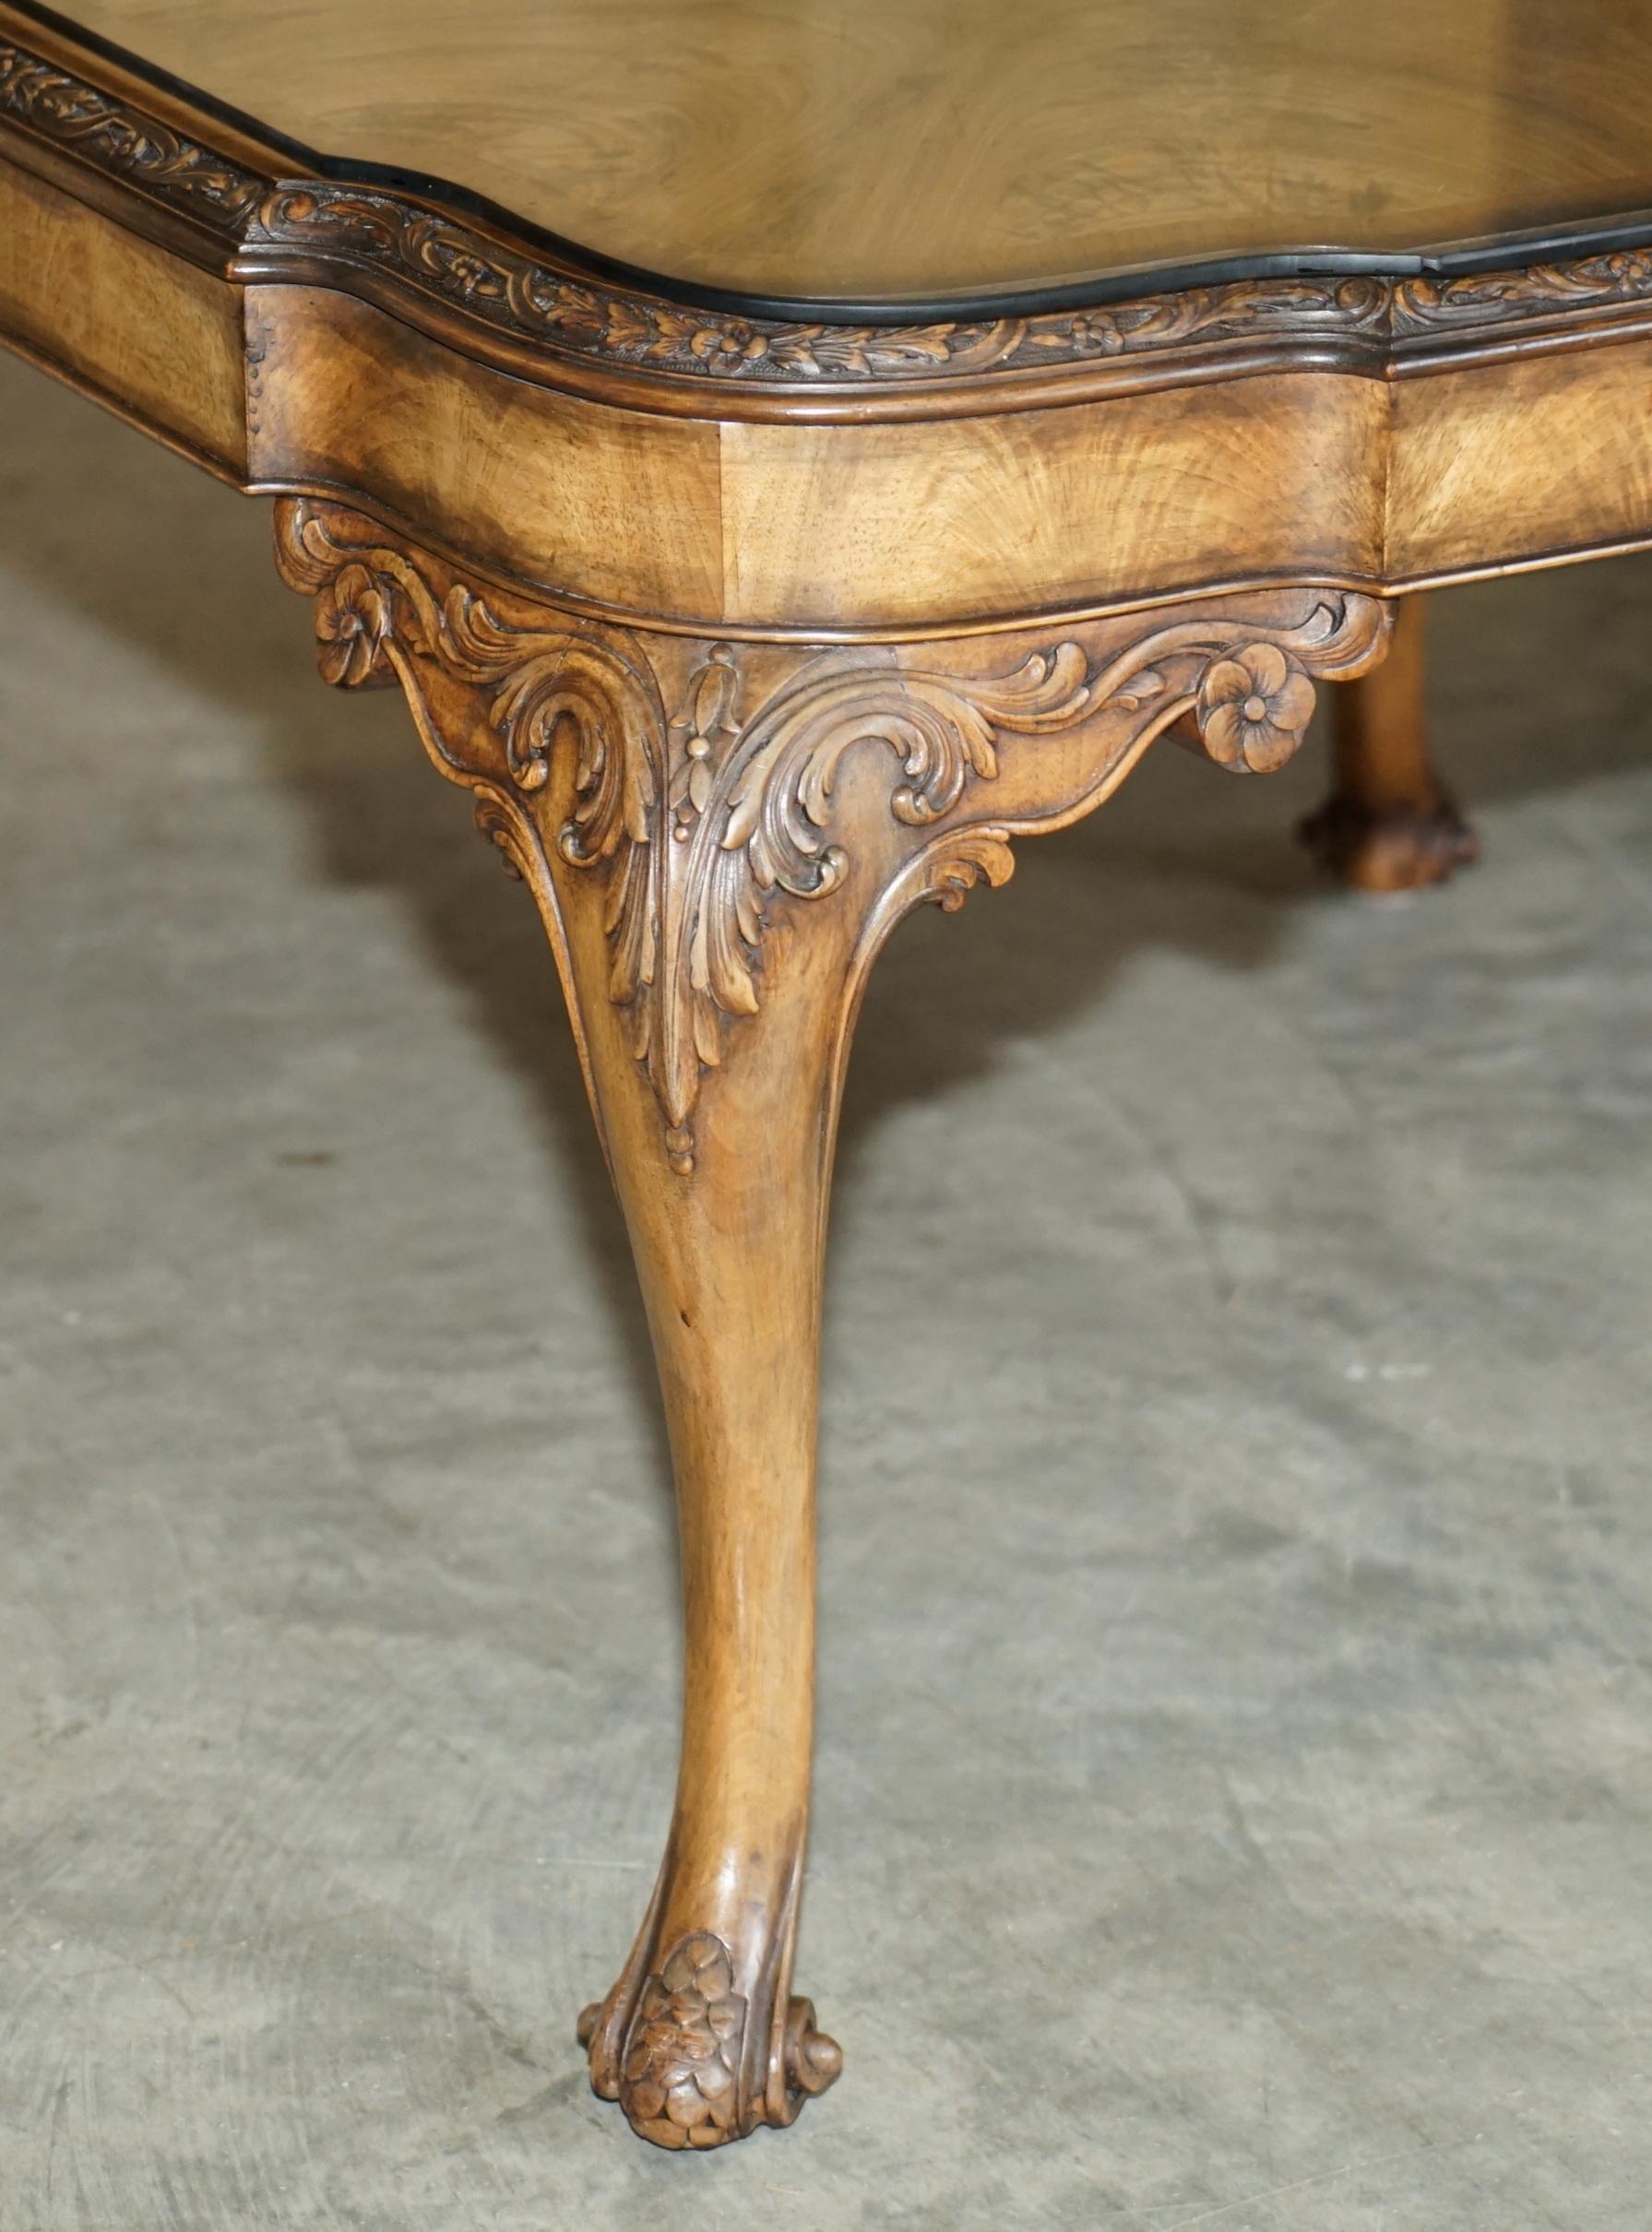 English Exquisite Burr Walnut Coffee Cocktail Table with Ornately Carved Cabriole Legs For Sale